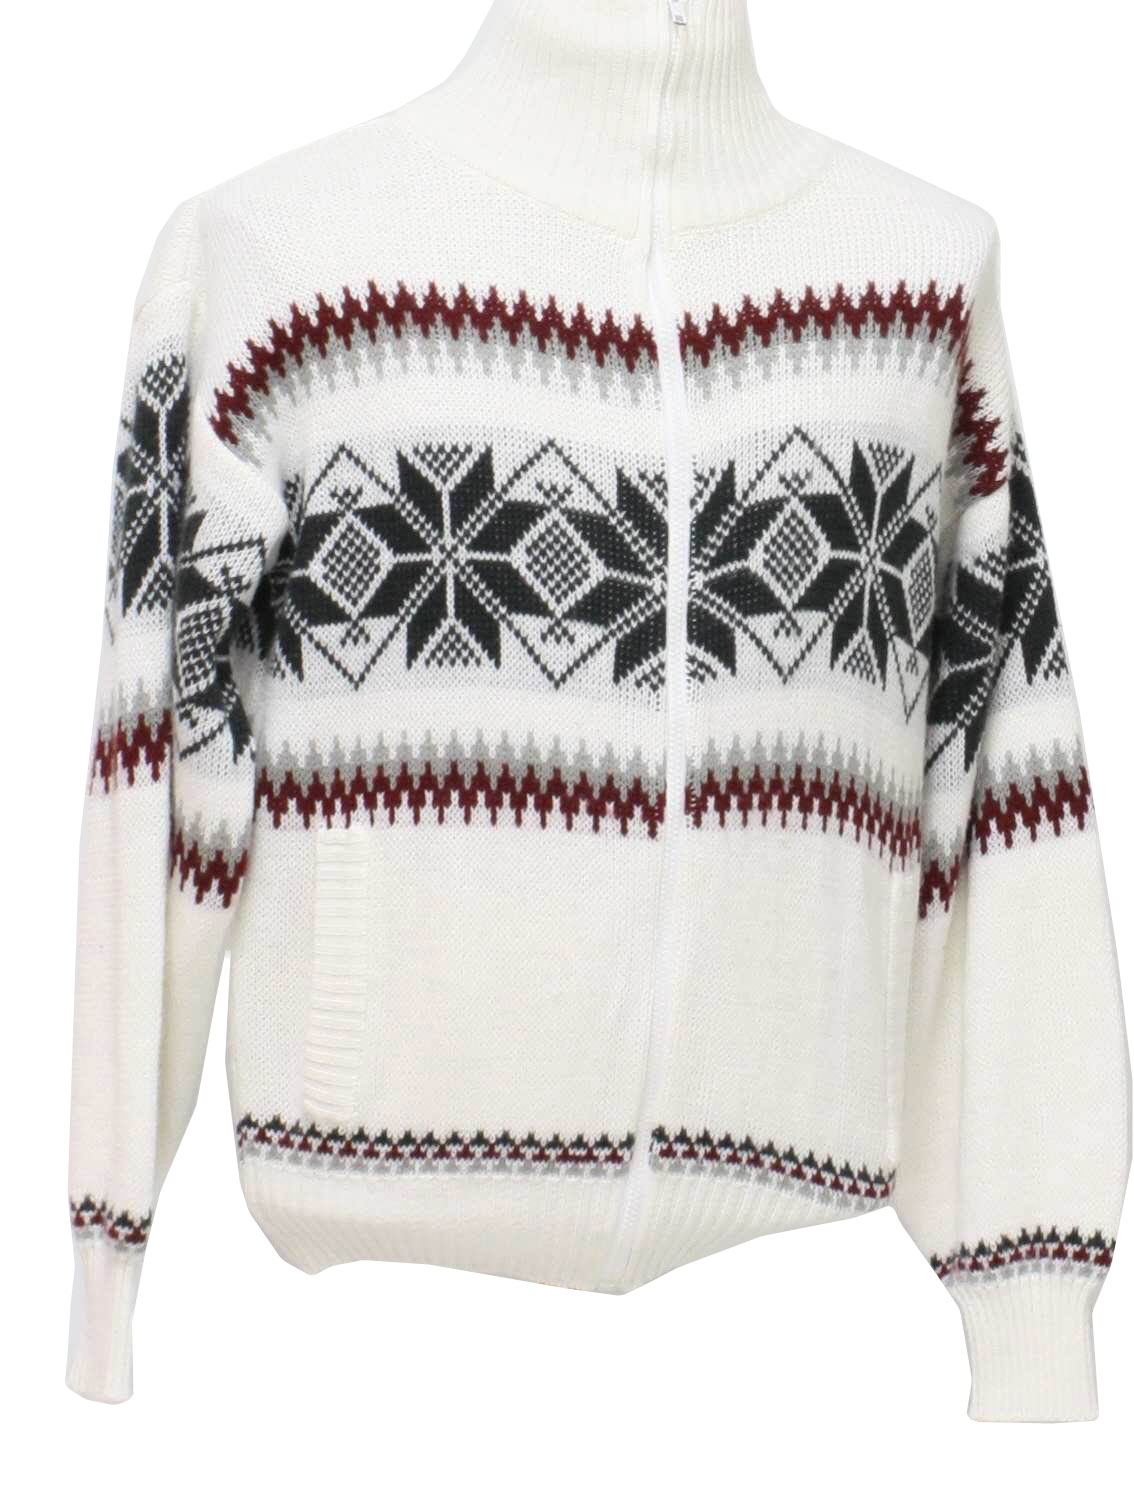 1990's Retro Sweater: 90s -Scandia Woods- Mens white background with ...